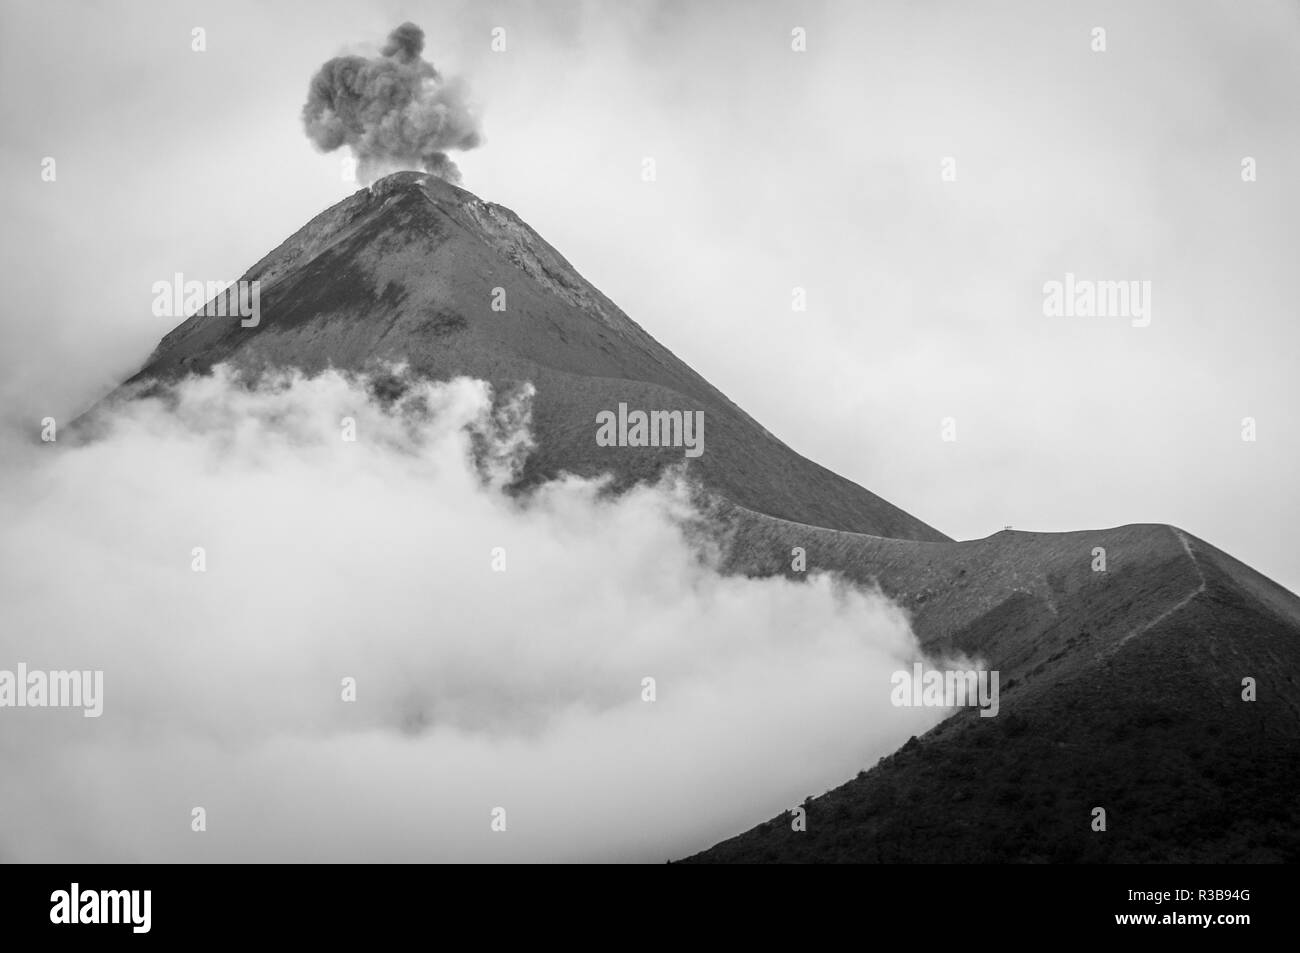 Eruption of volcano Fuego in cloudy and misty weather. Black and white photo. Stock Photo